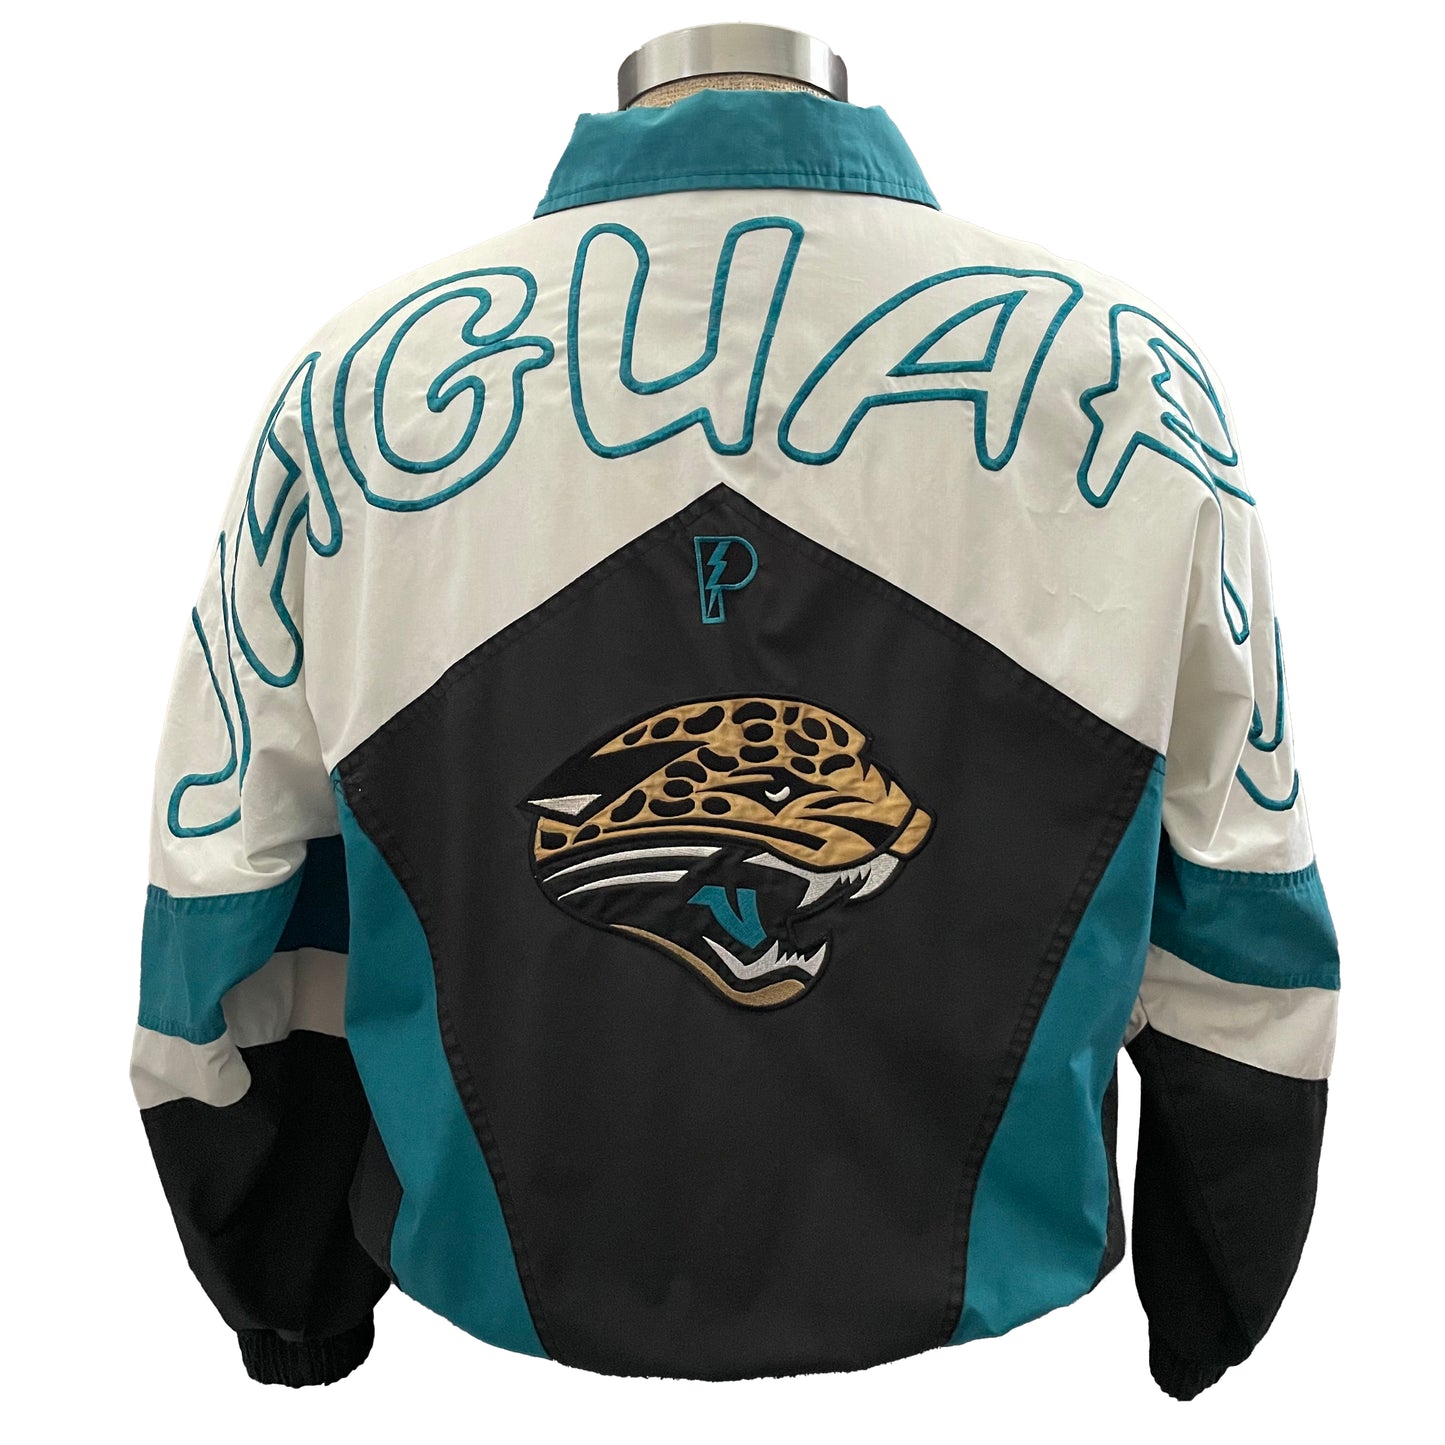 Jacksonville Jaguars PRO PLAYER windbreaker by Daniel Young size SMALL